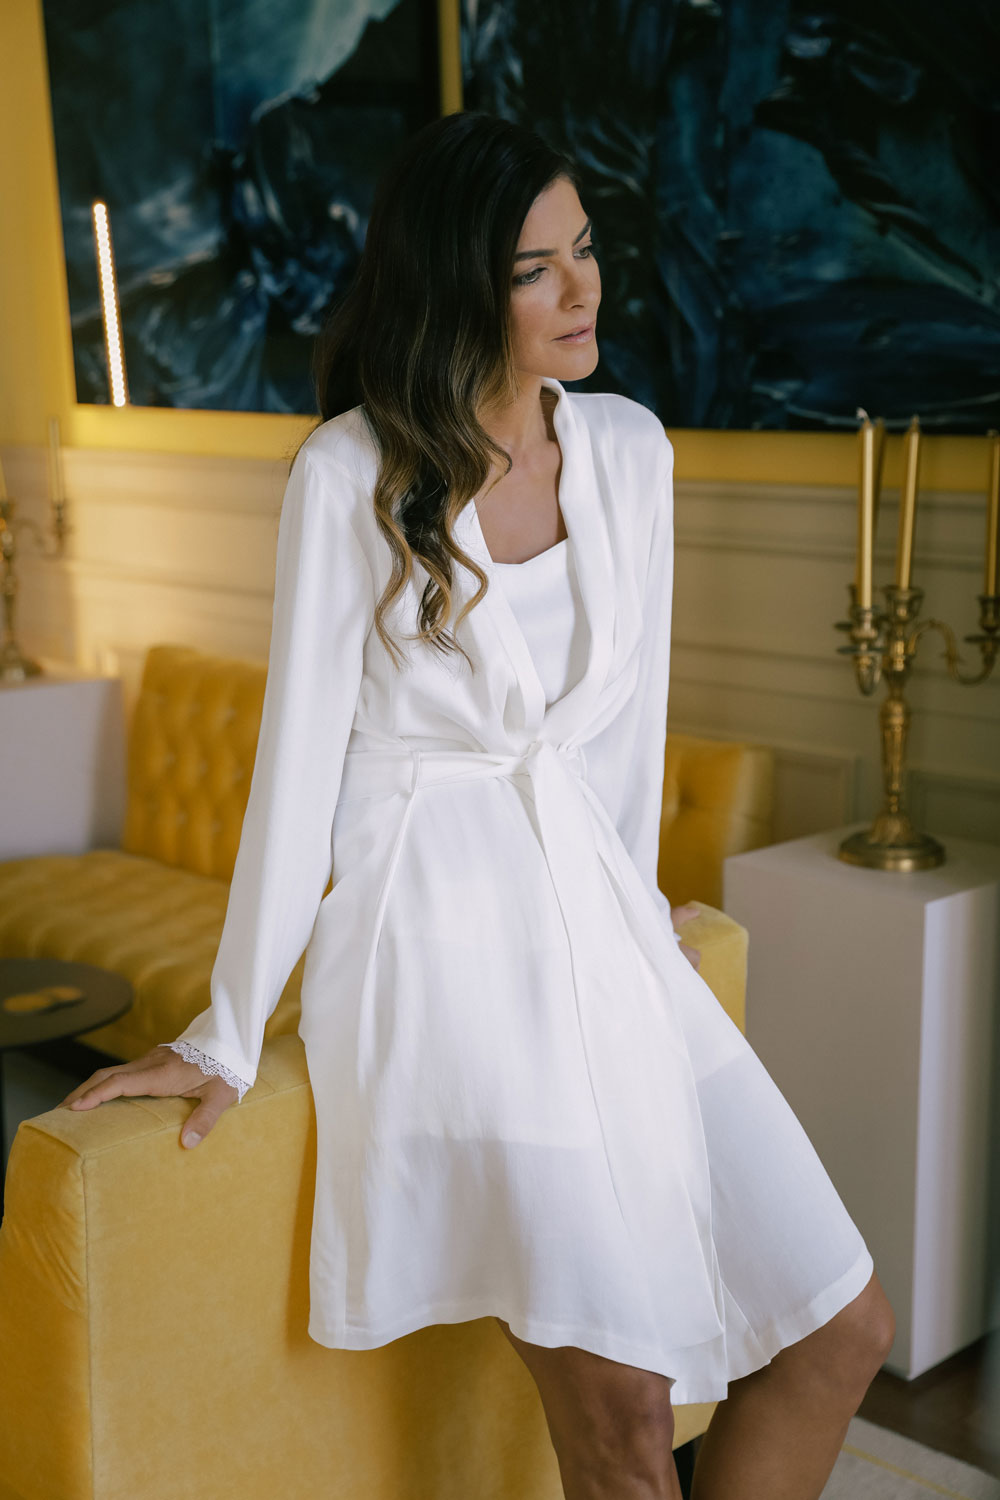 woman leaning against a yellow sofa, dressed in a white silk robe from Leizi's Silky Dreams collection.